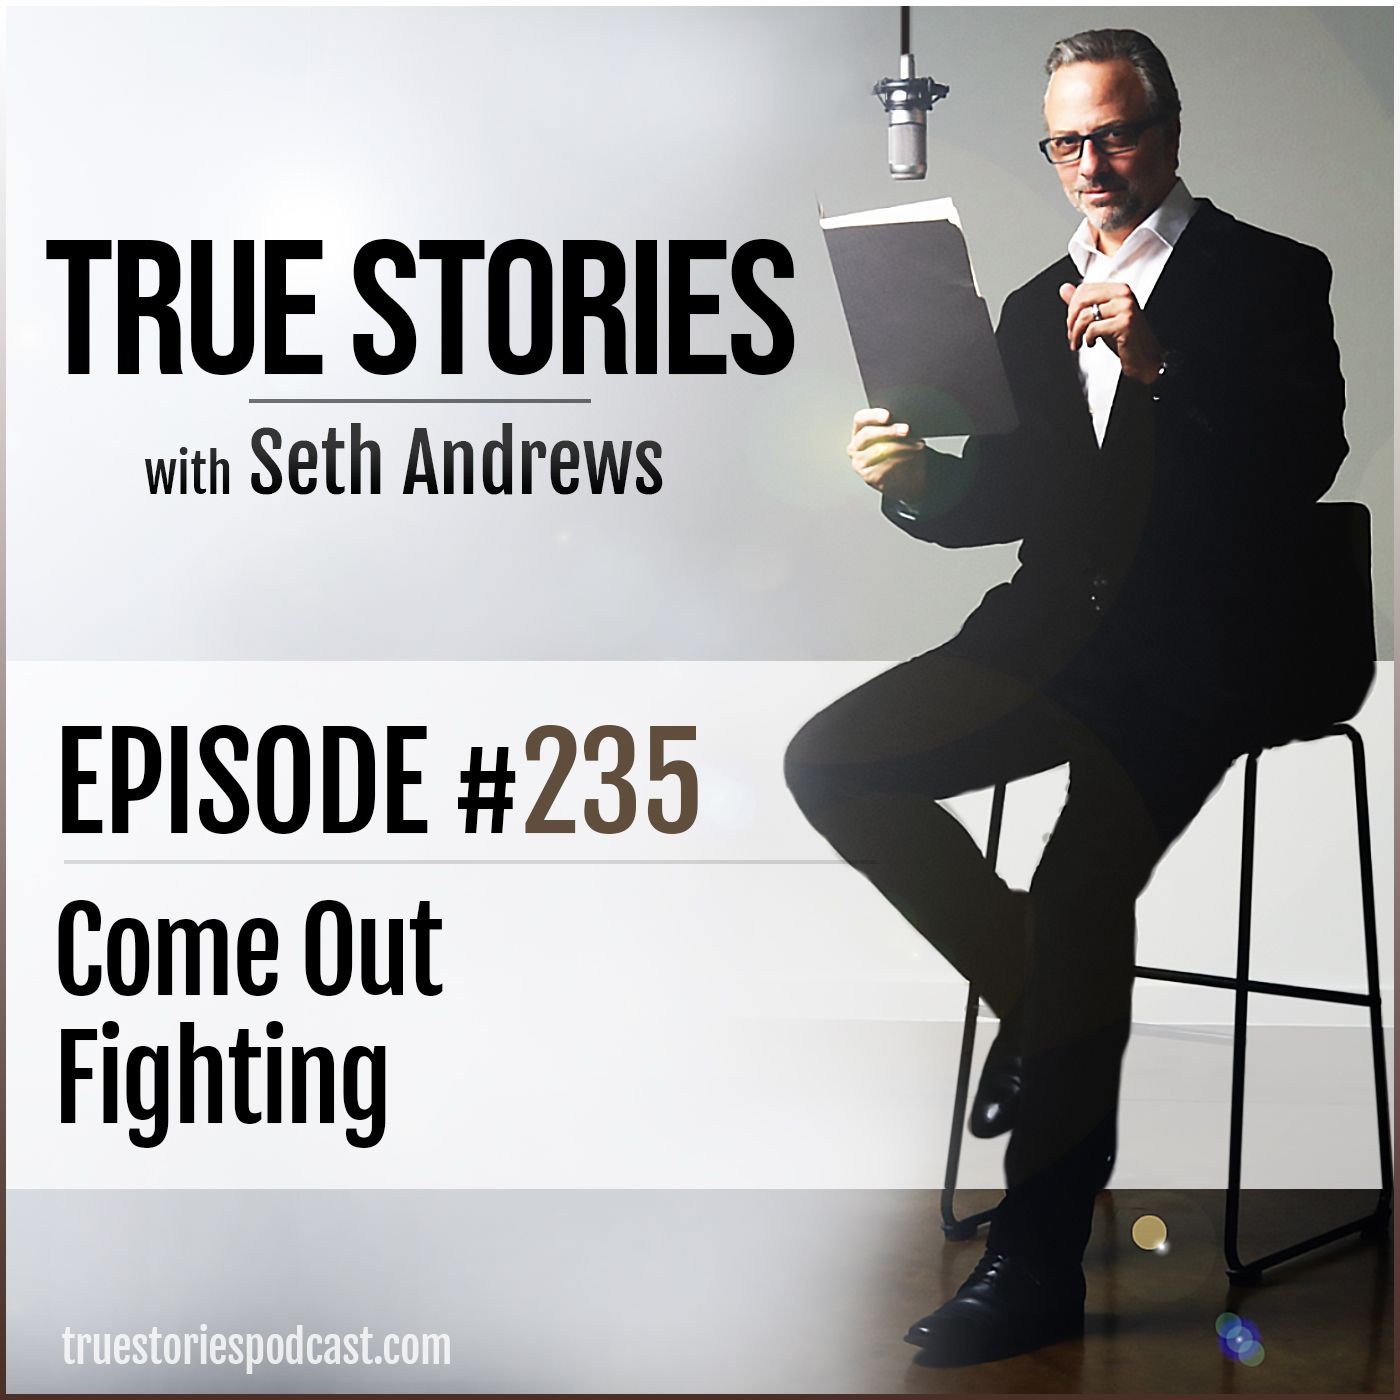 True Stories #235 - Come Out Fighting